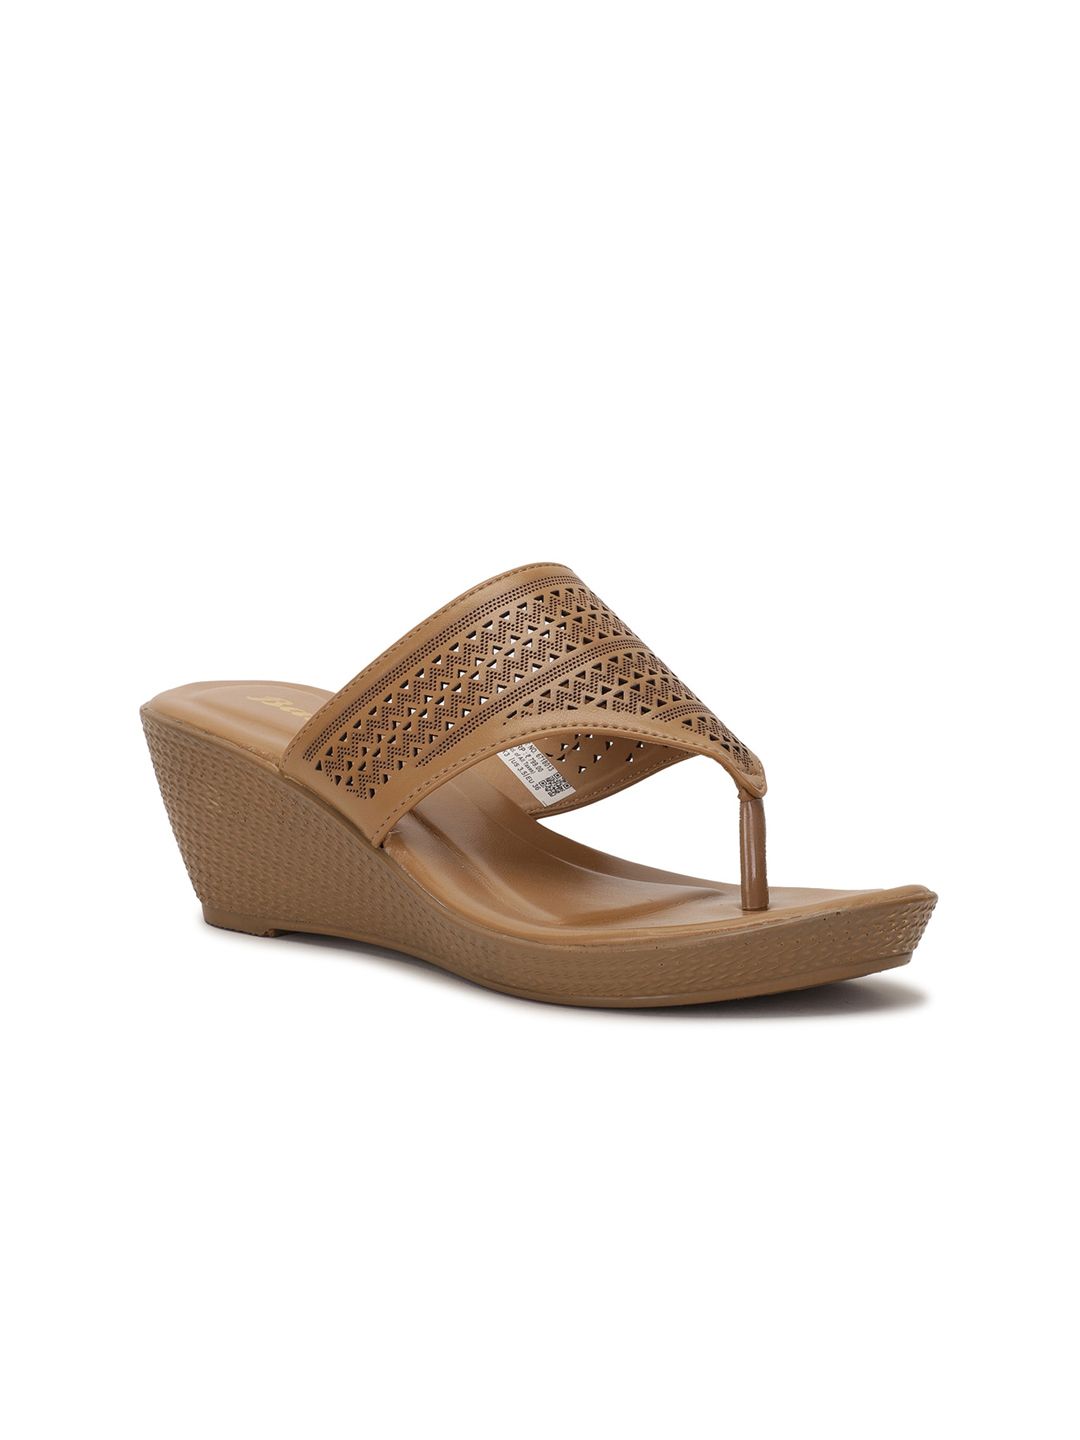 Bata Gold-Toned PU Wedge Sandals with Laser Cuts Price in India